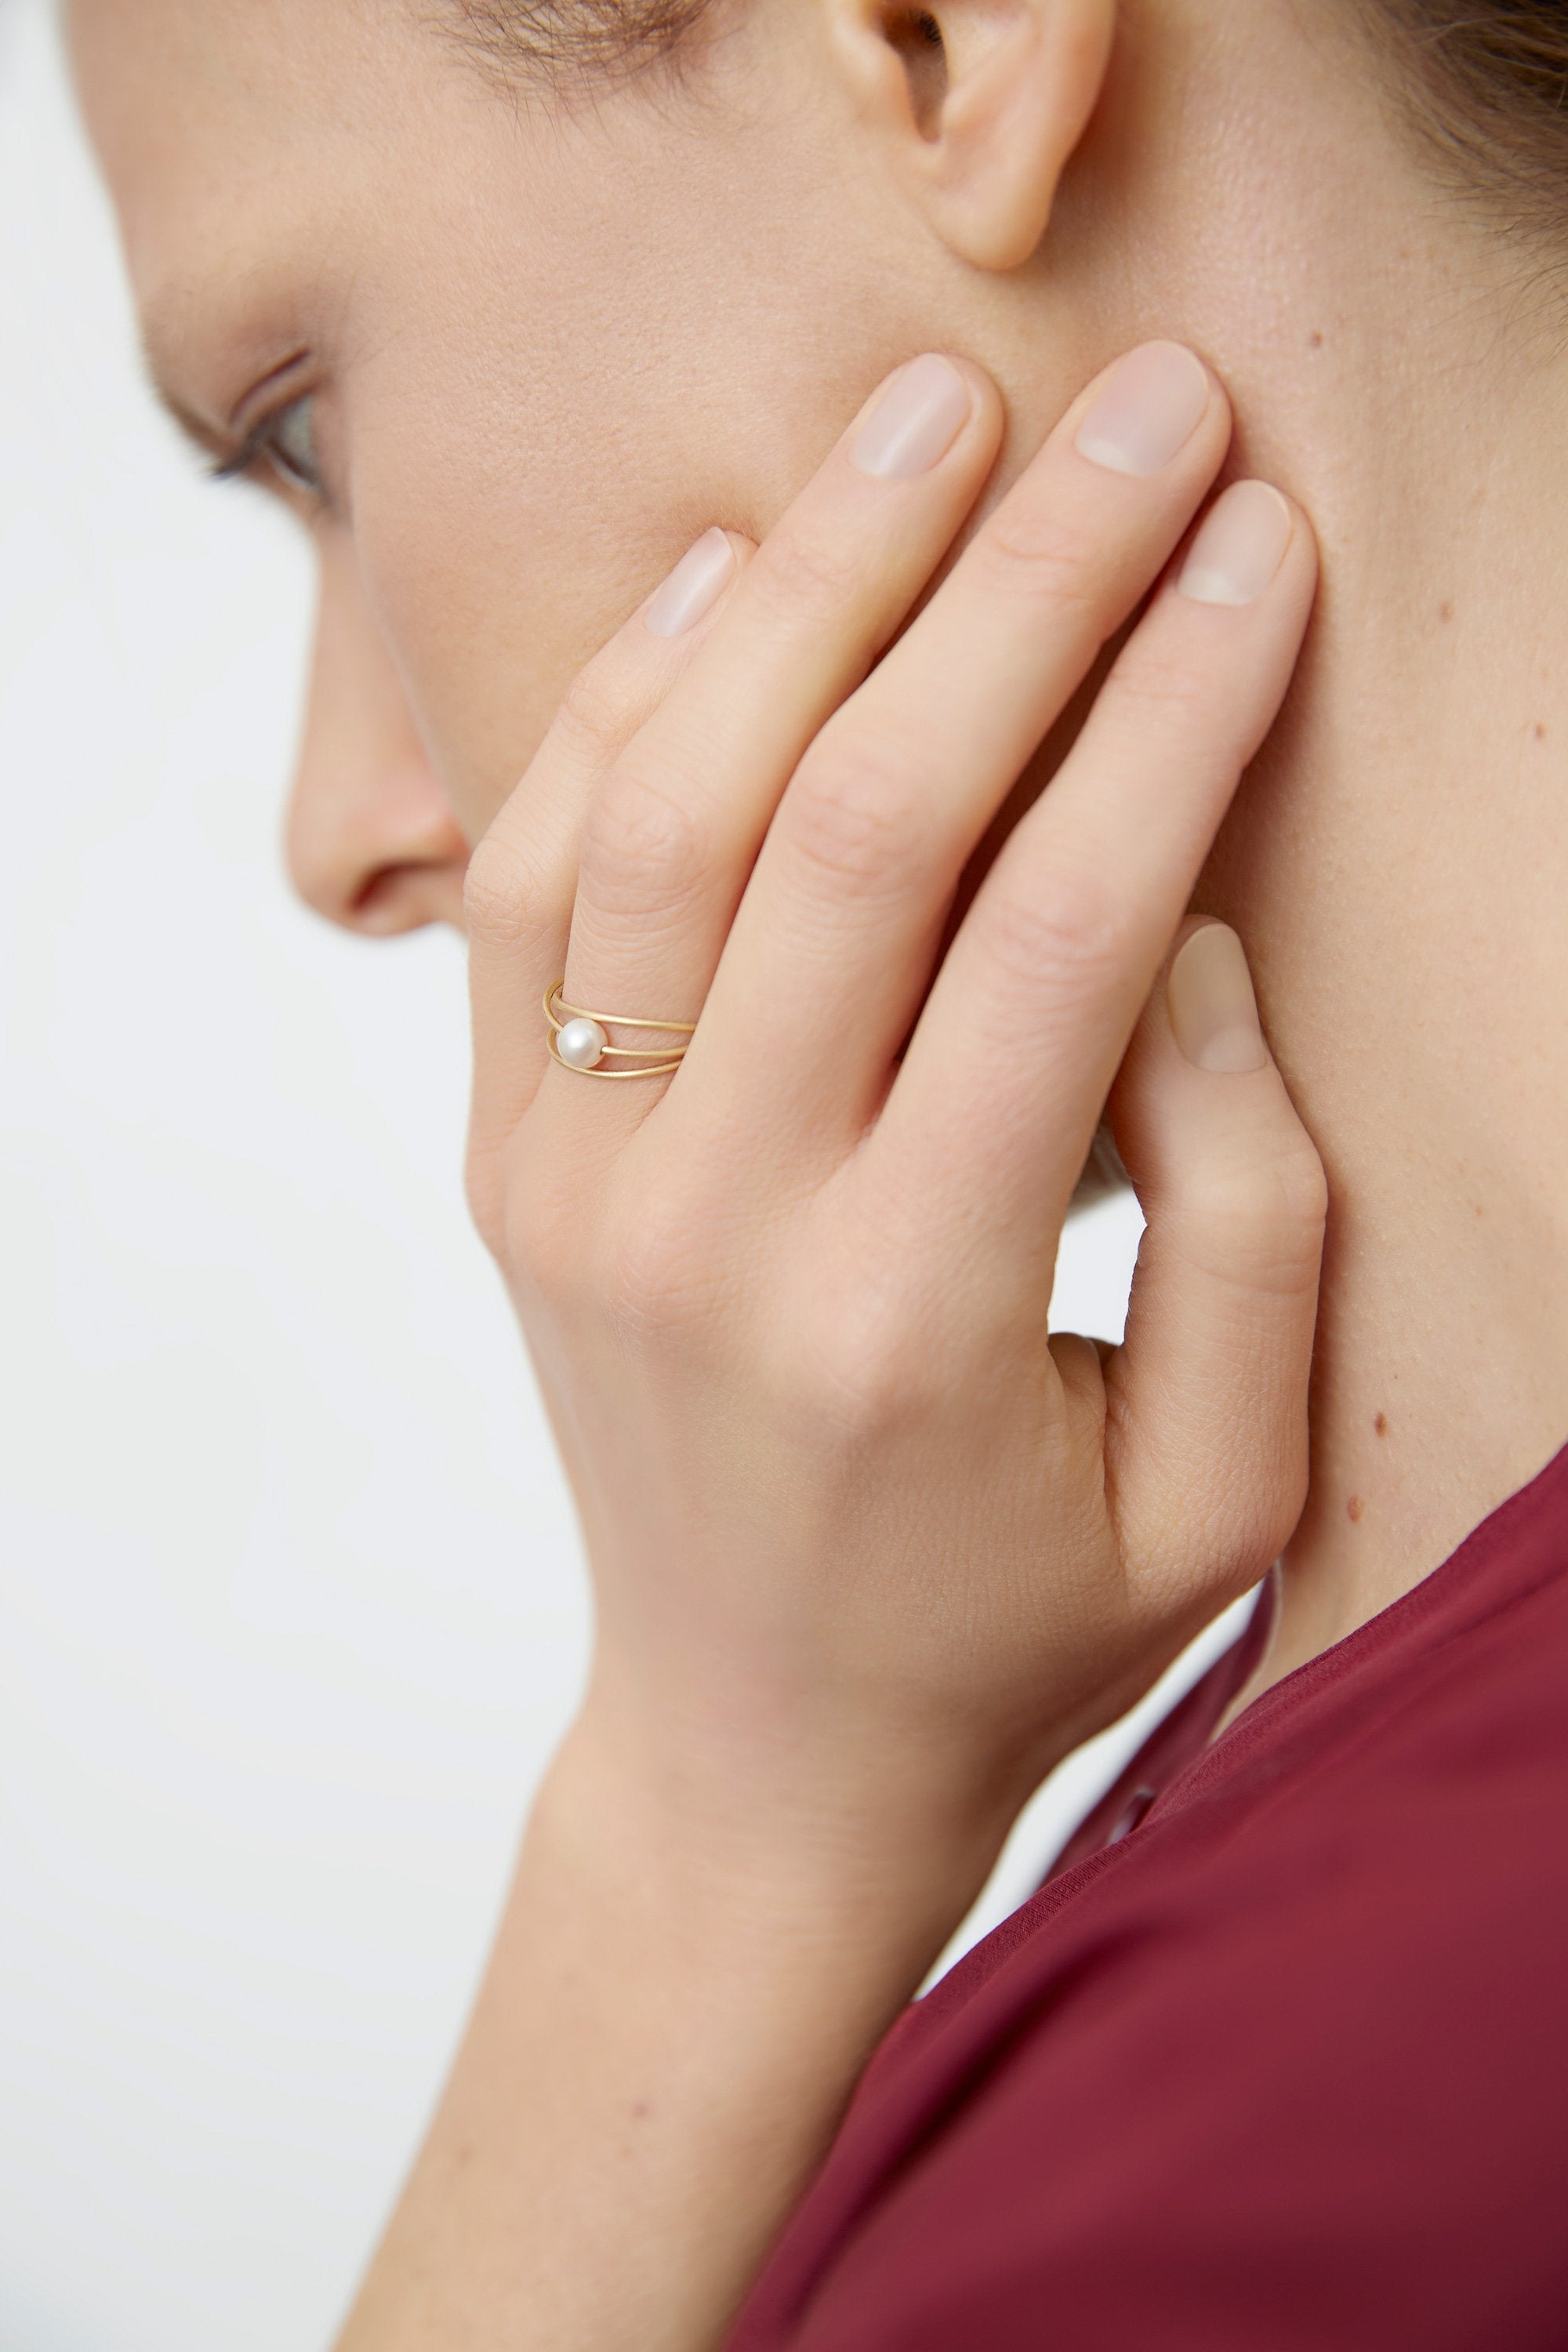 18KT yellow gold ring with white akoya pearl (diameter 4,8 MM) worn by a female hand- Tre Cerchi